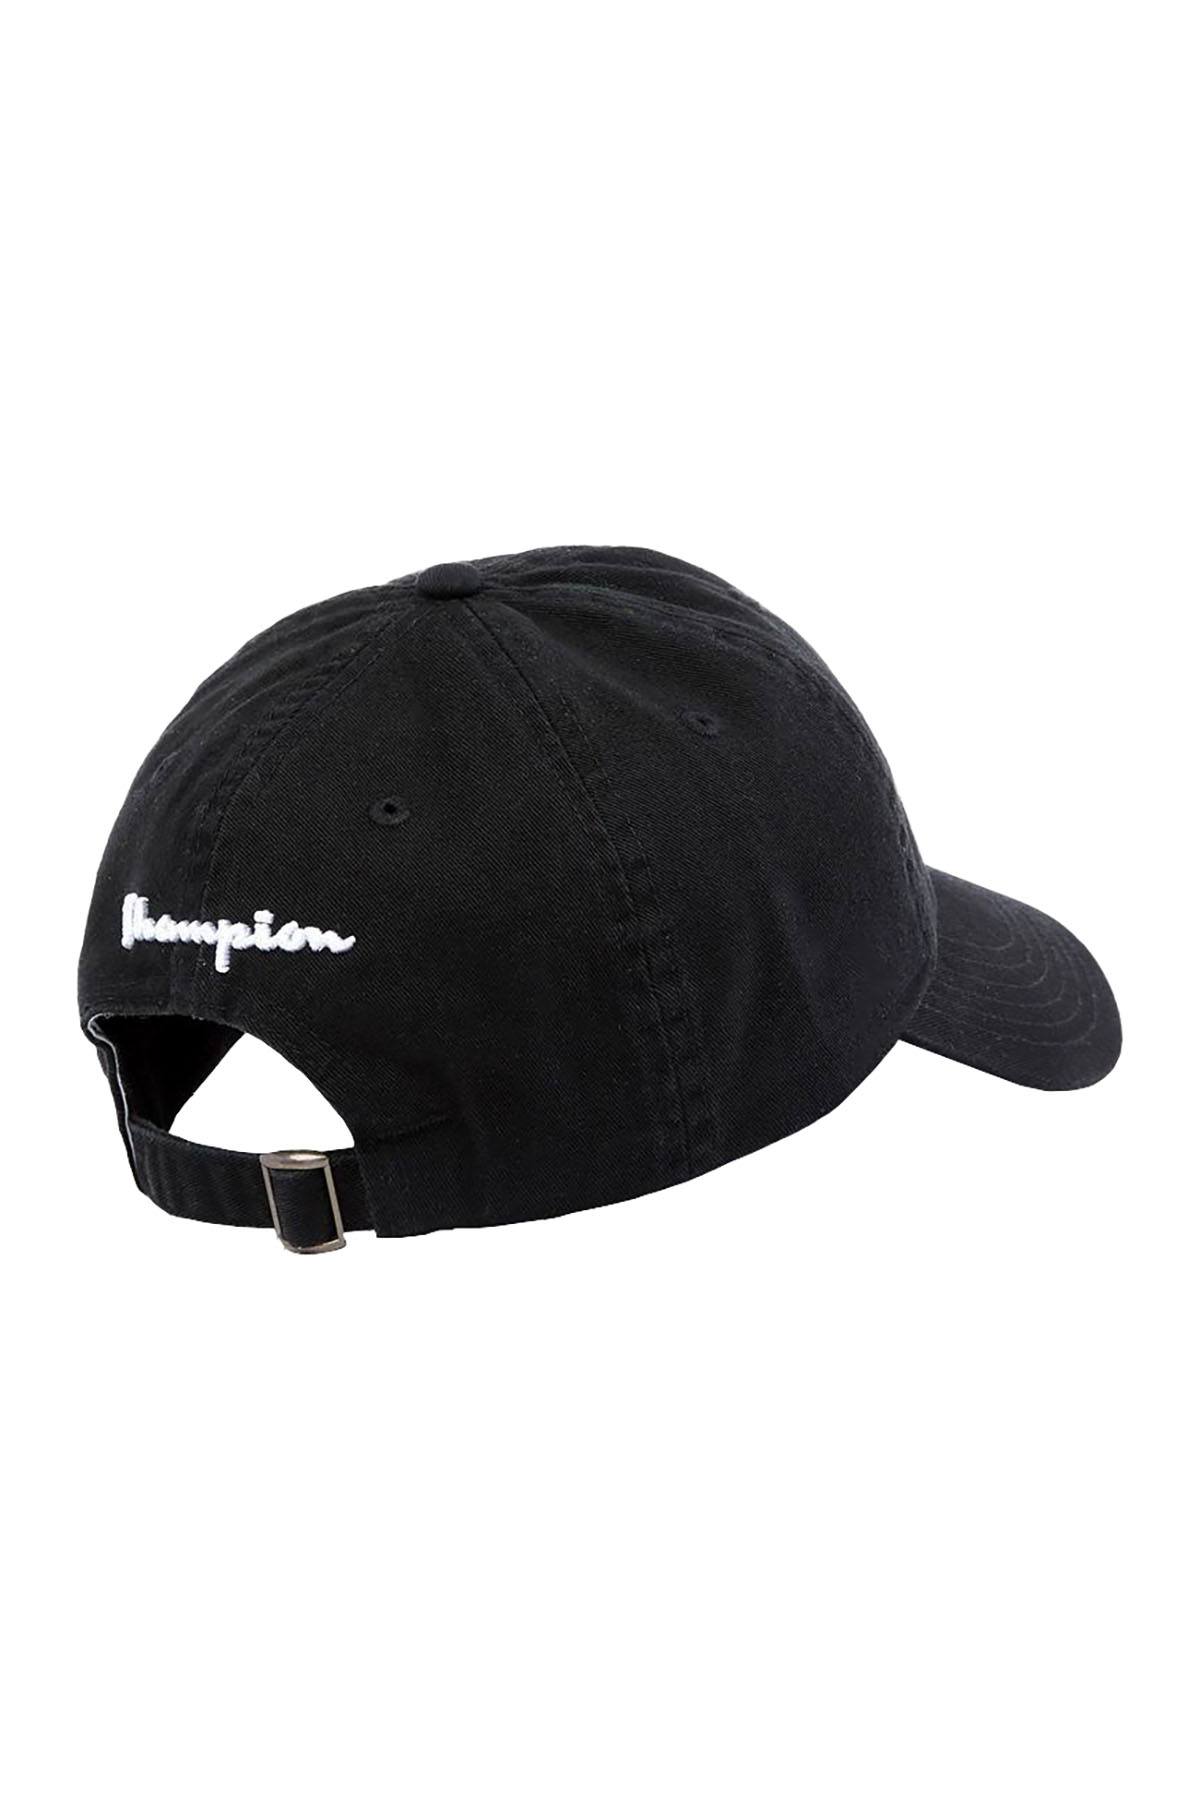 Champion Black 'Our Father' Adjustable Dad Hat